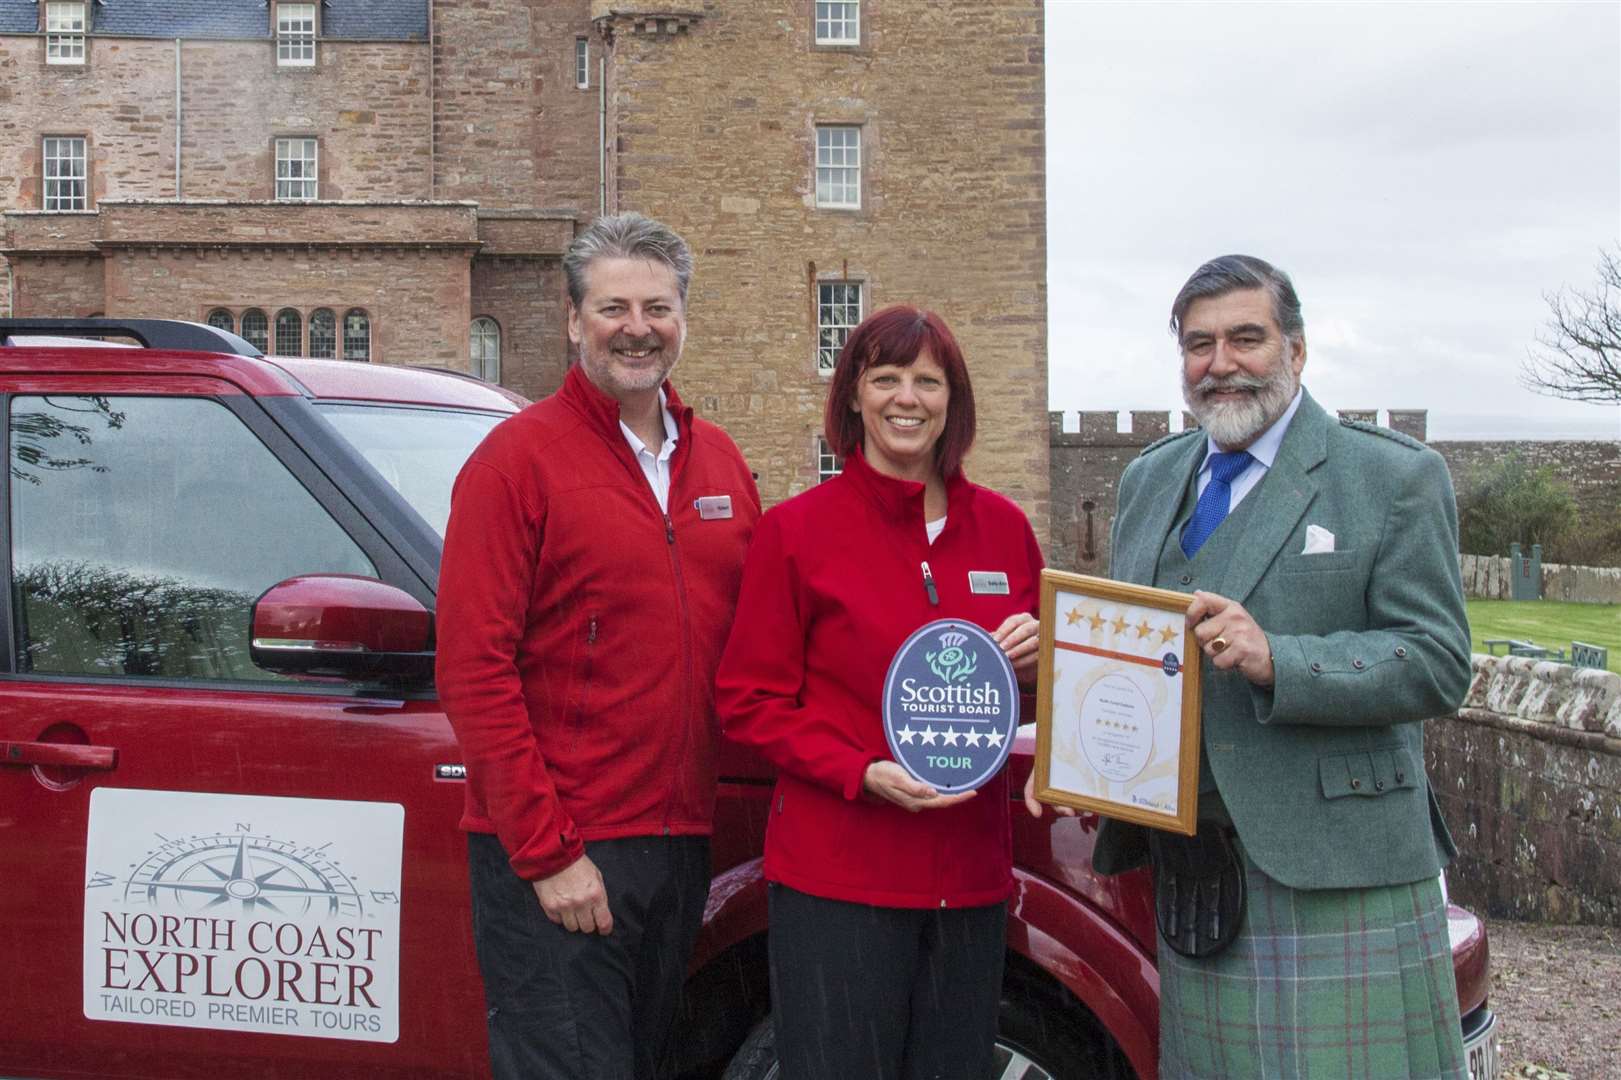 VisitScotland chairman Lord Thurso presents the Quality Assurance Award to Robert and Sally-Ann James of North Coast Explorer Tours.